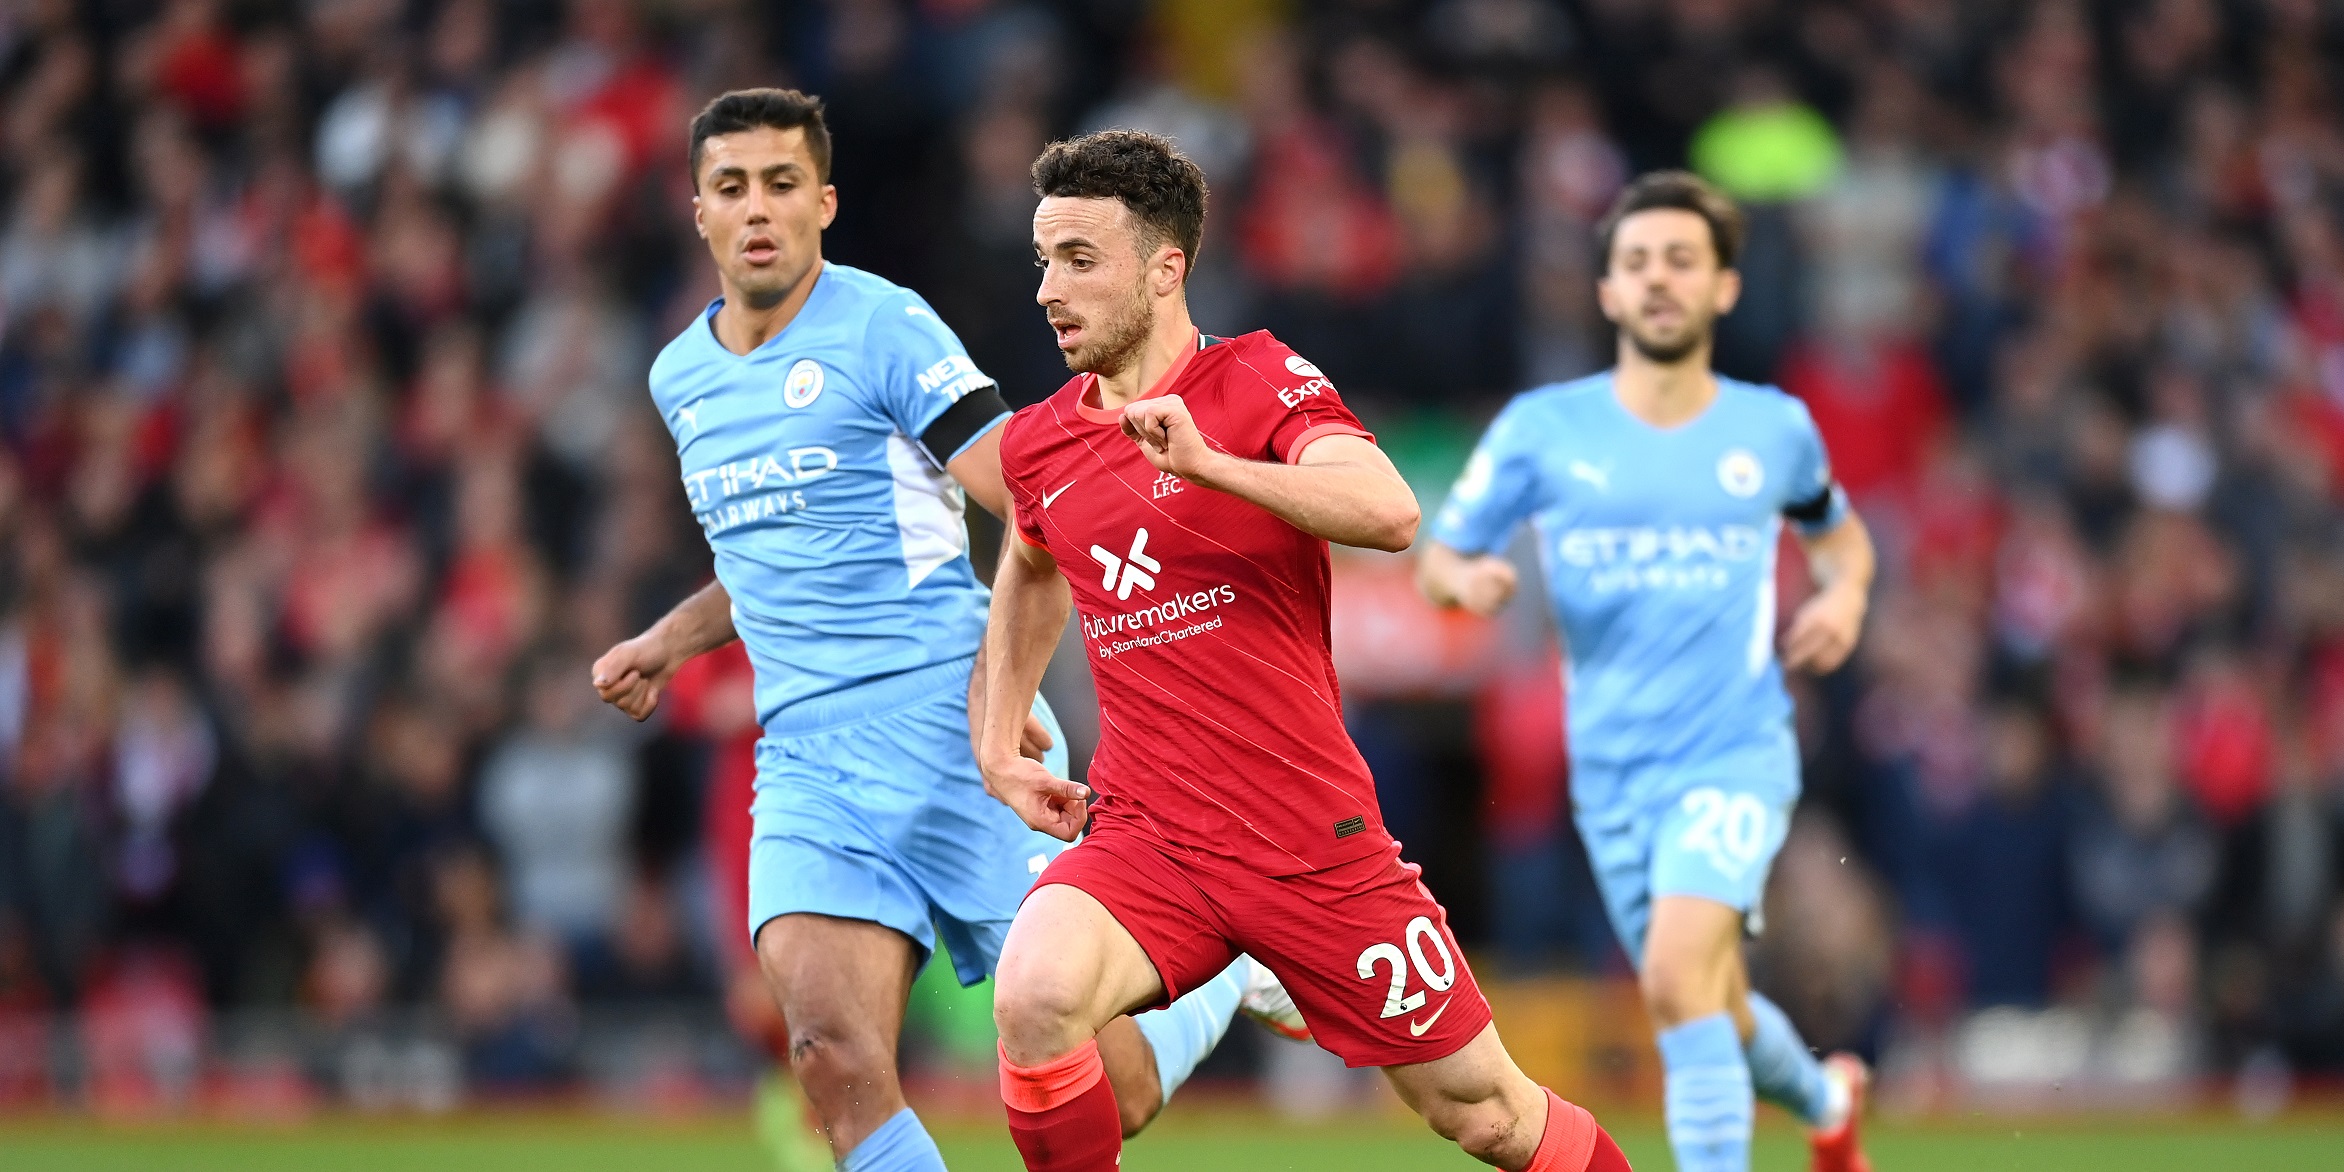 Joe Cole expecting an ‘unbelievable game’ between Liverpool and Manchester City and labels two of Jurgen Klopp’s stars as ‘sensational’